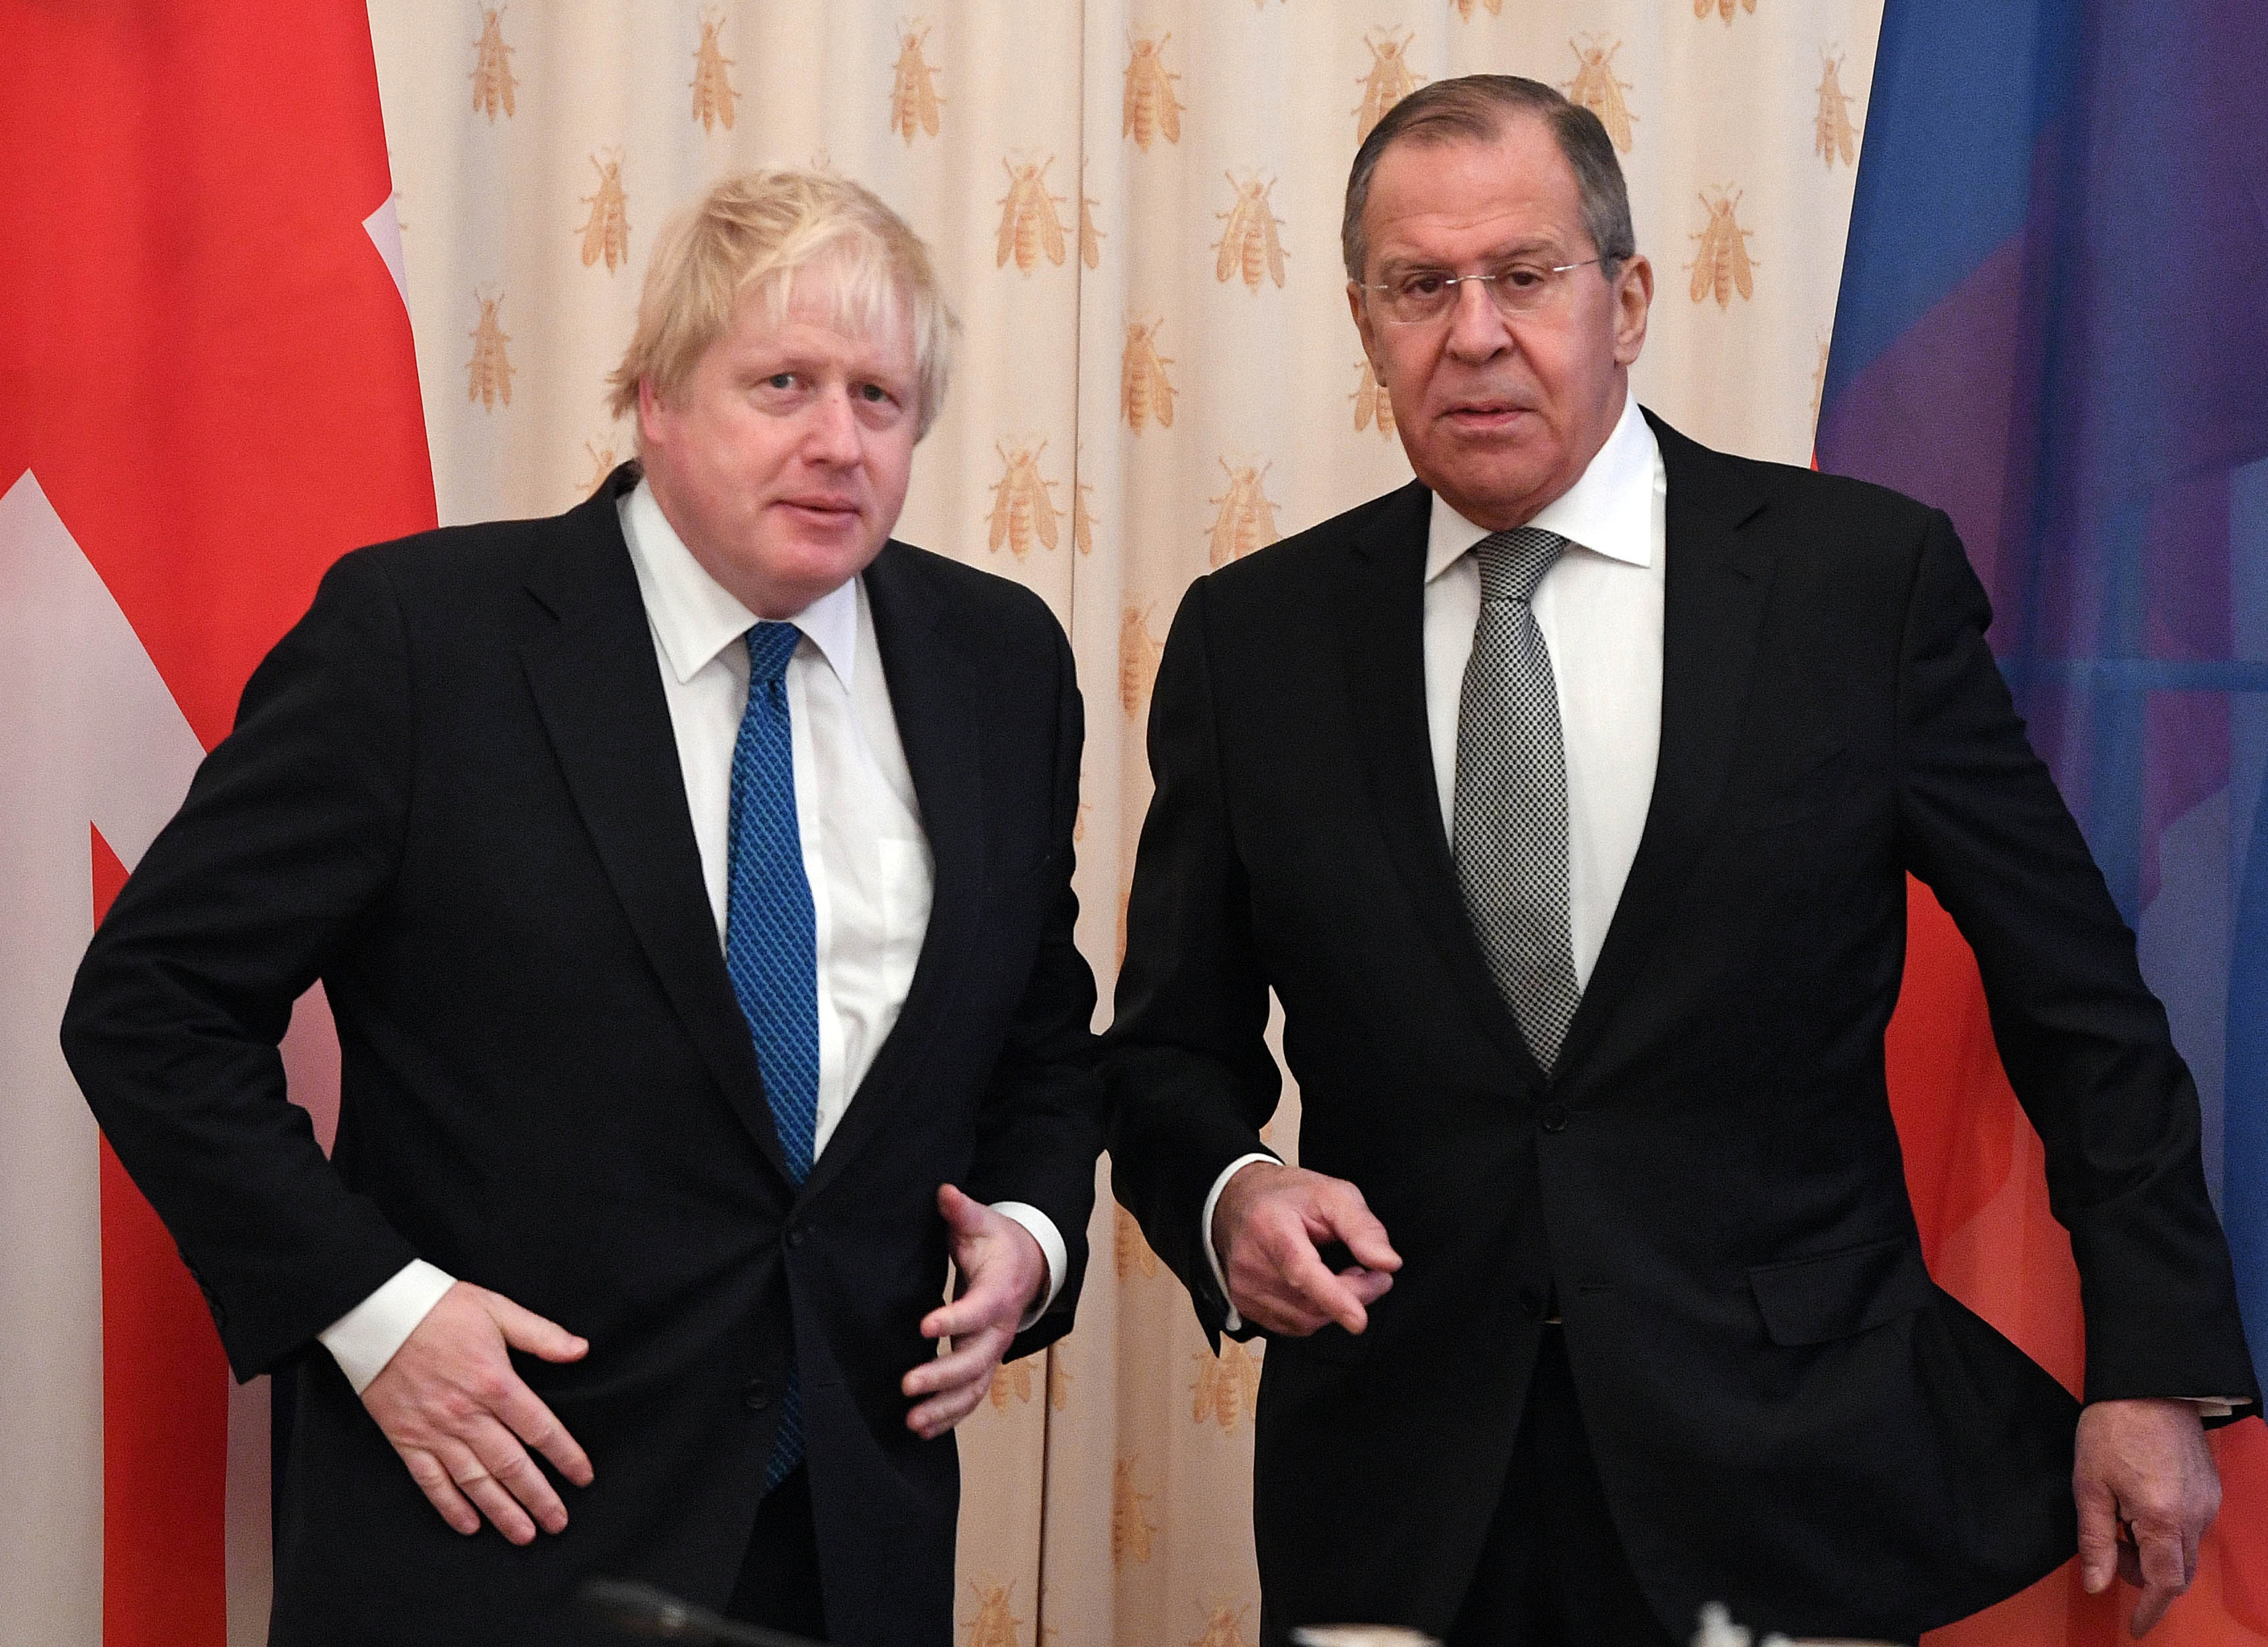 <strong>Boris Johnson told Sergei Lavrov: "I&rsquo;m delighted to say there are increasing exports of British Kettle Crisps (sic) to Russia".</strong>